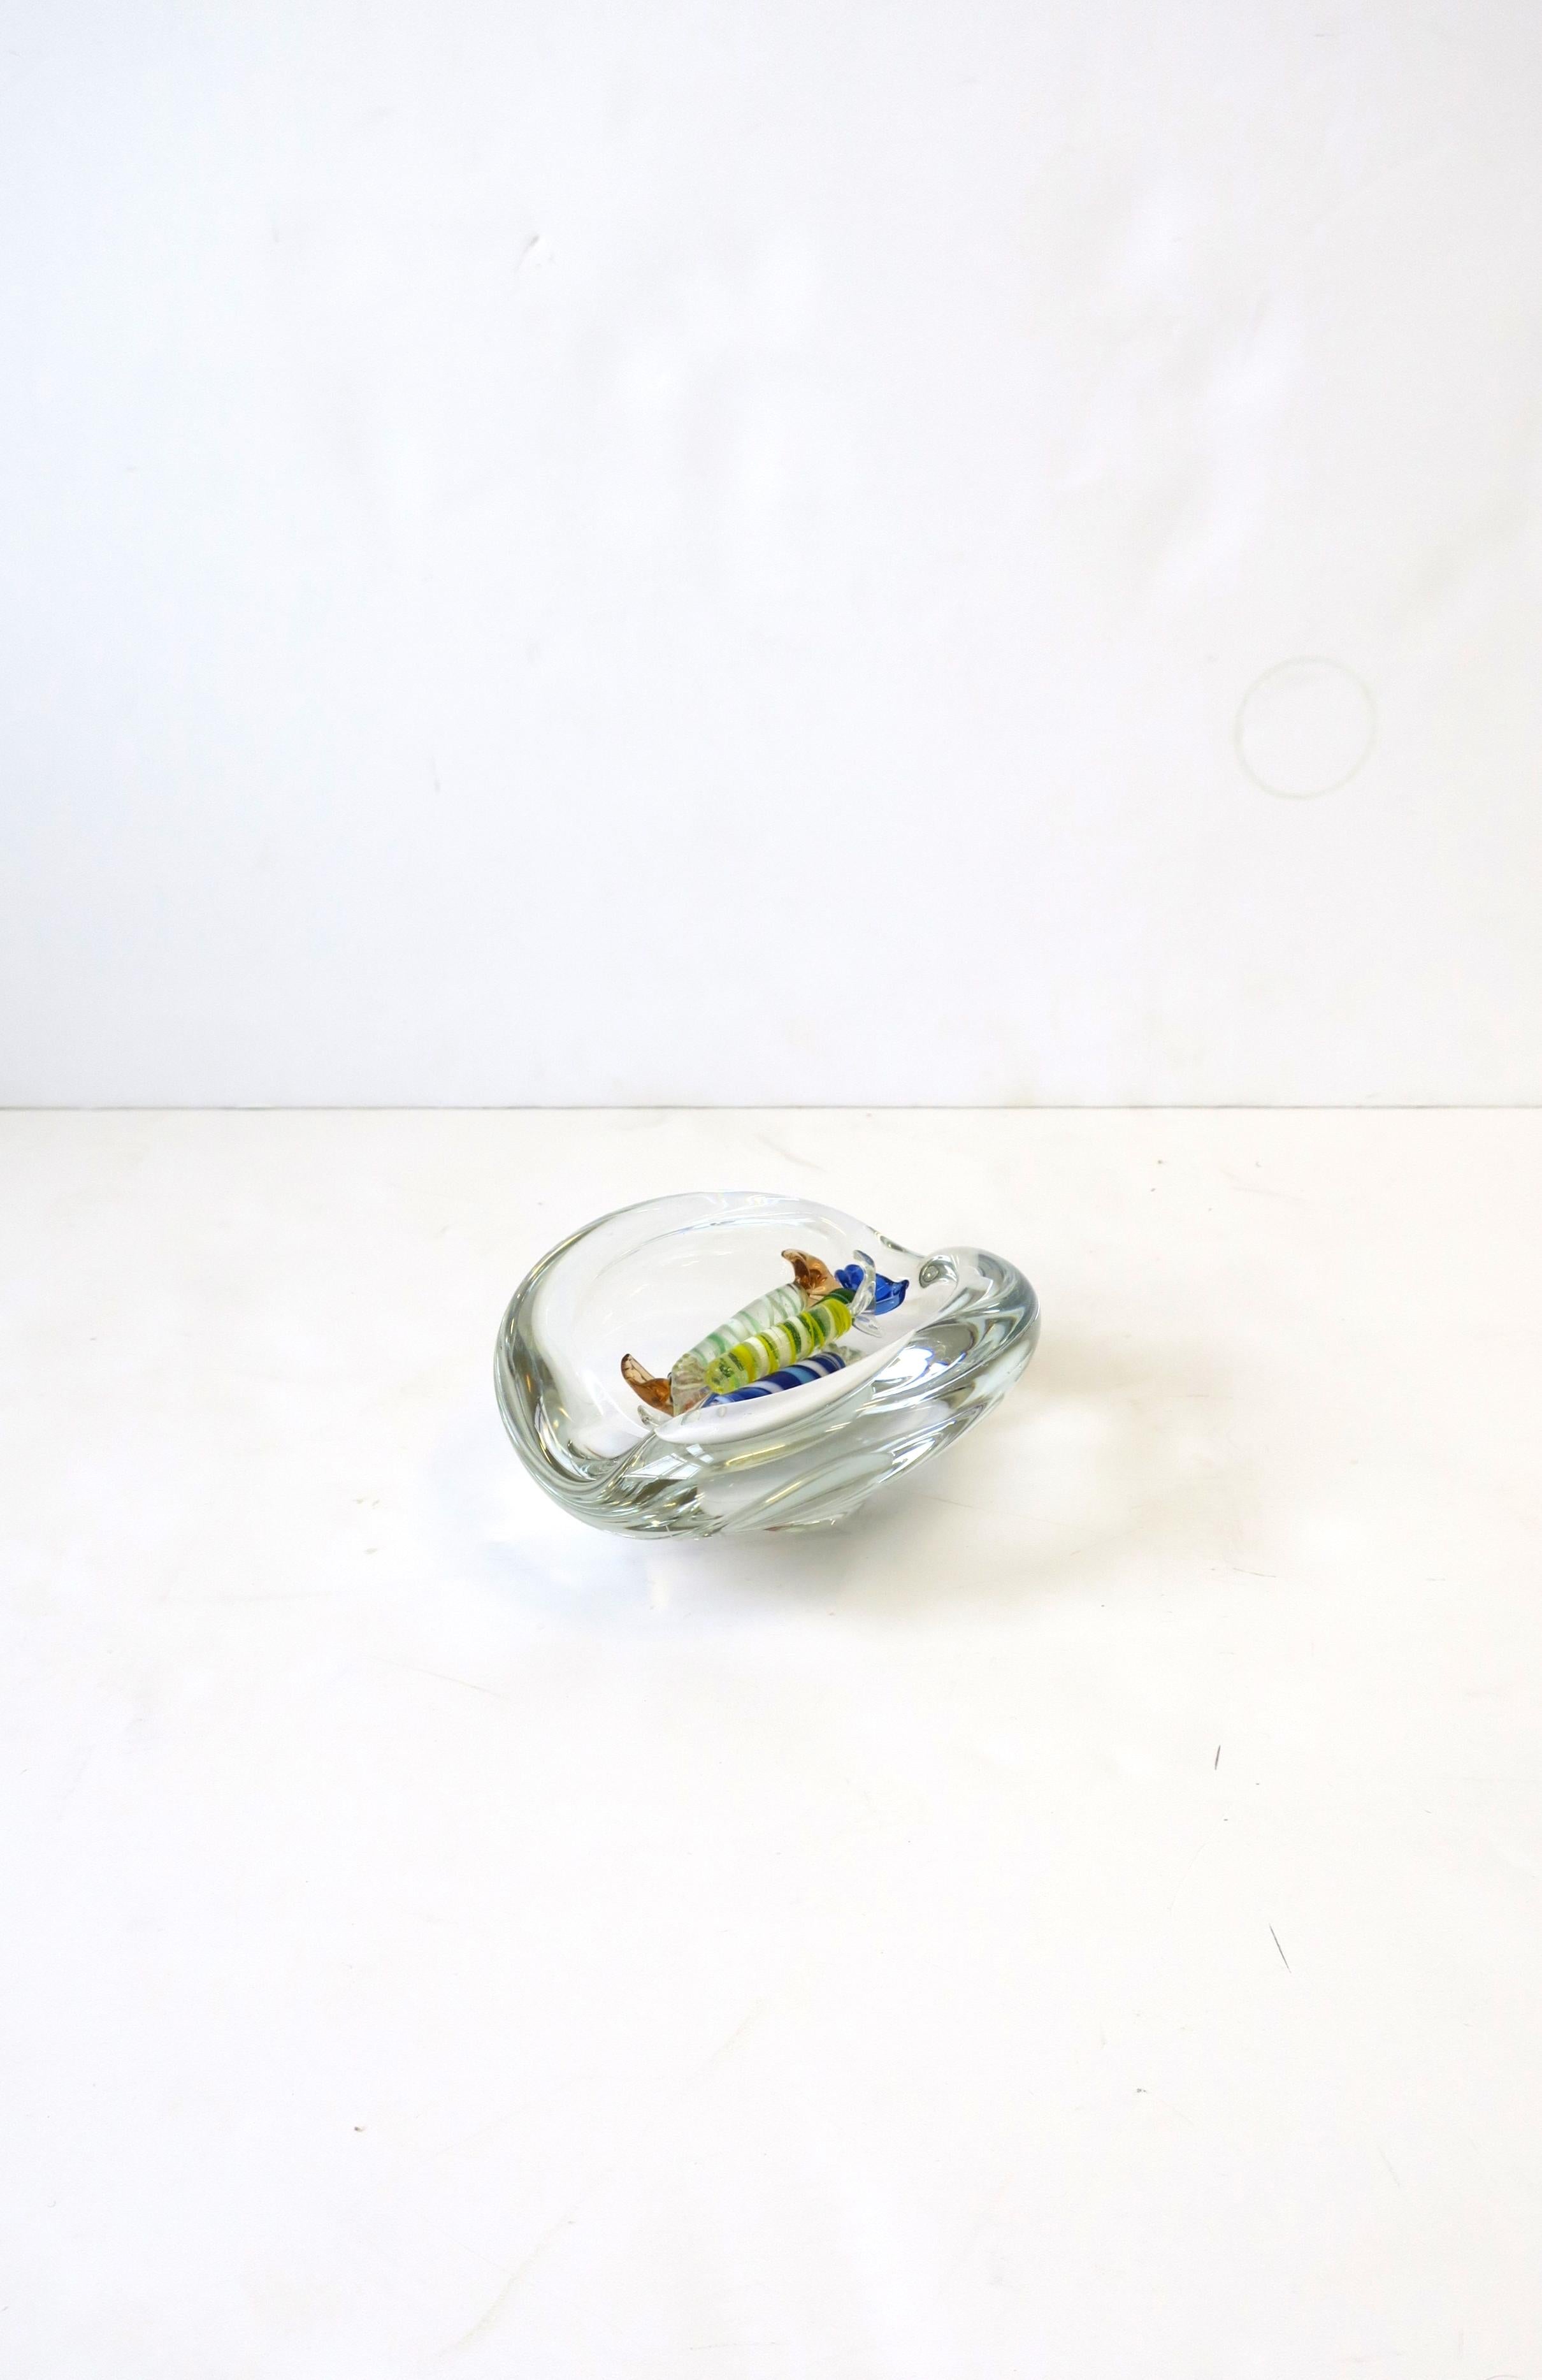 Scandinavian Modern Art Glass Bowl or Ashtray by Holmegaard, 1958 For Sale 3